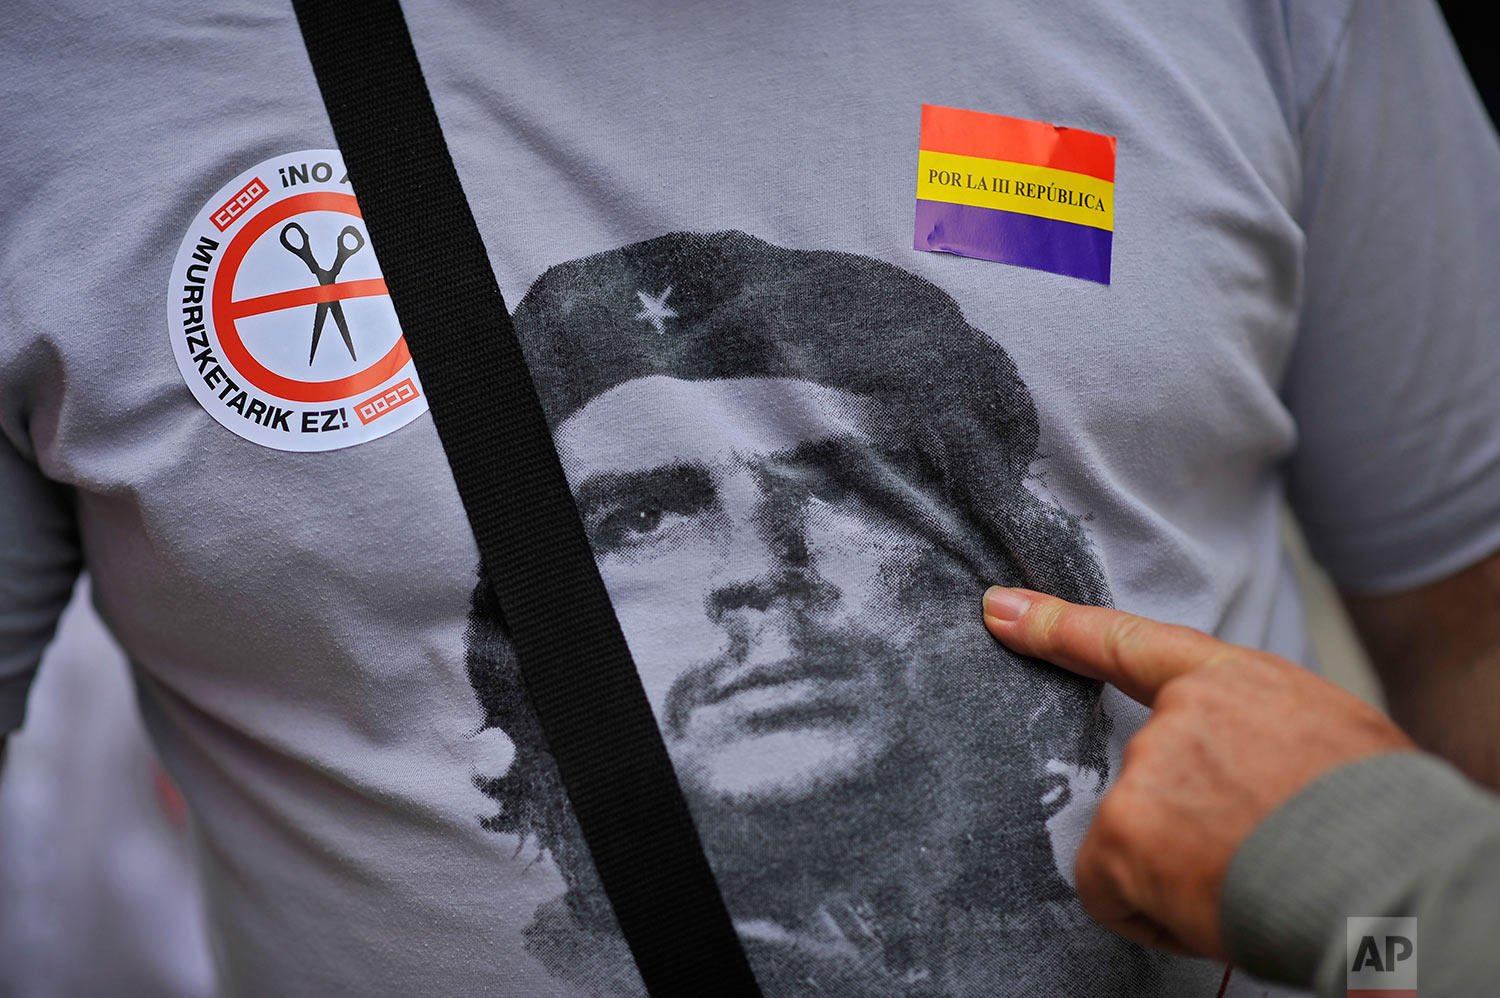  A citizen points to a portrait of ''Che Guevara'' on a shirt of one demonstrator between two stickers, at a protest against the Spanish government's cutback plans, and for a new Spanish Republic, right, in Pamplona, northern Spain, Sunday, Oct. 7, 2